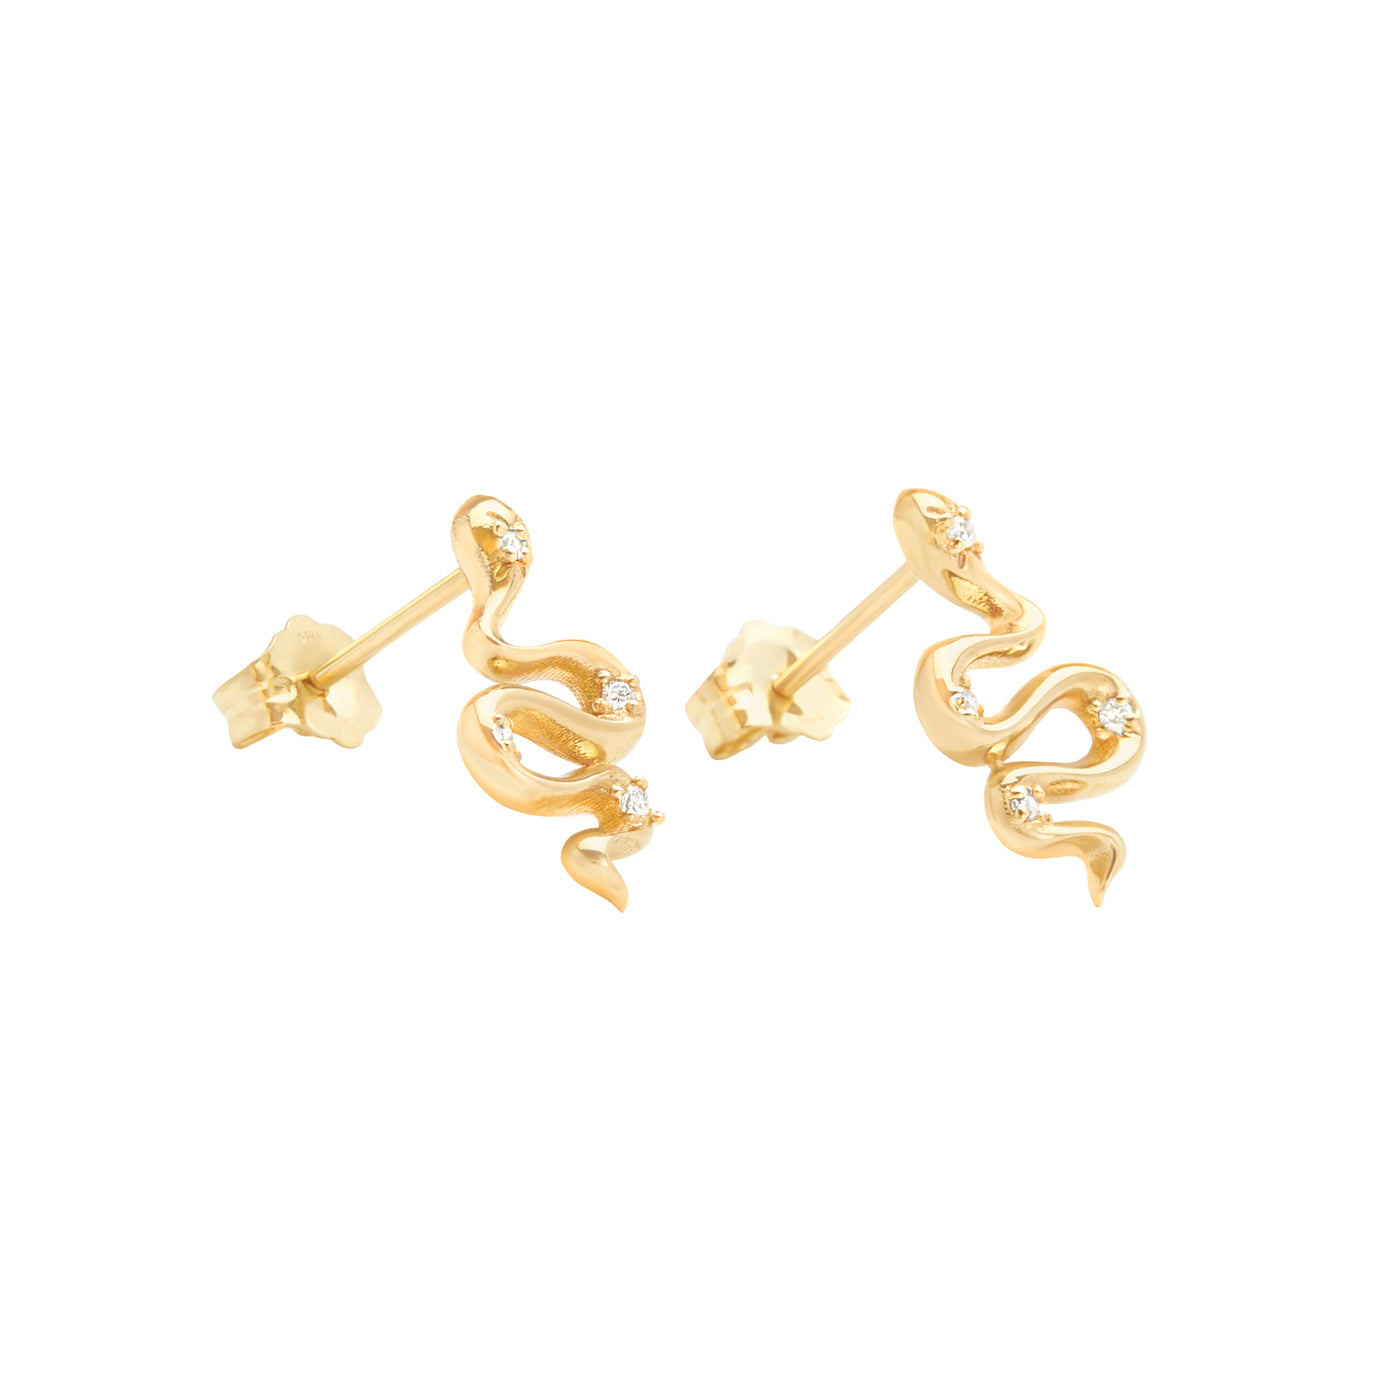 14k Karat yellow gold snake stud earrings with diamonds on white background turned for side view